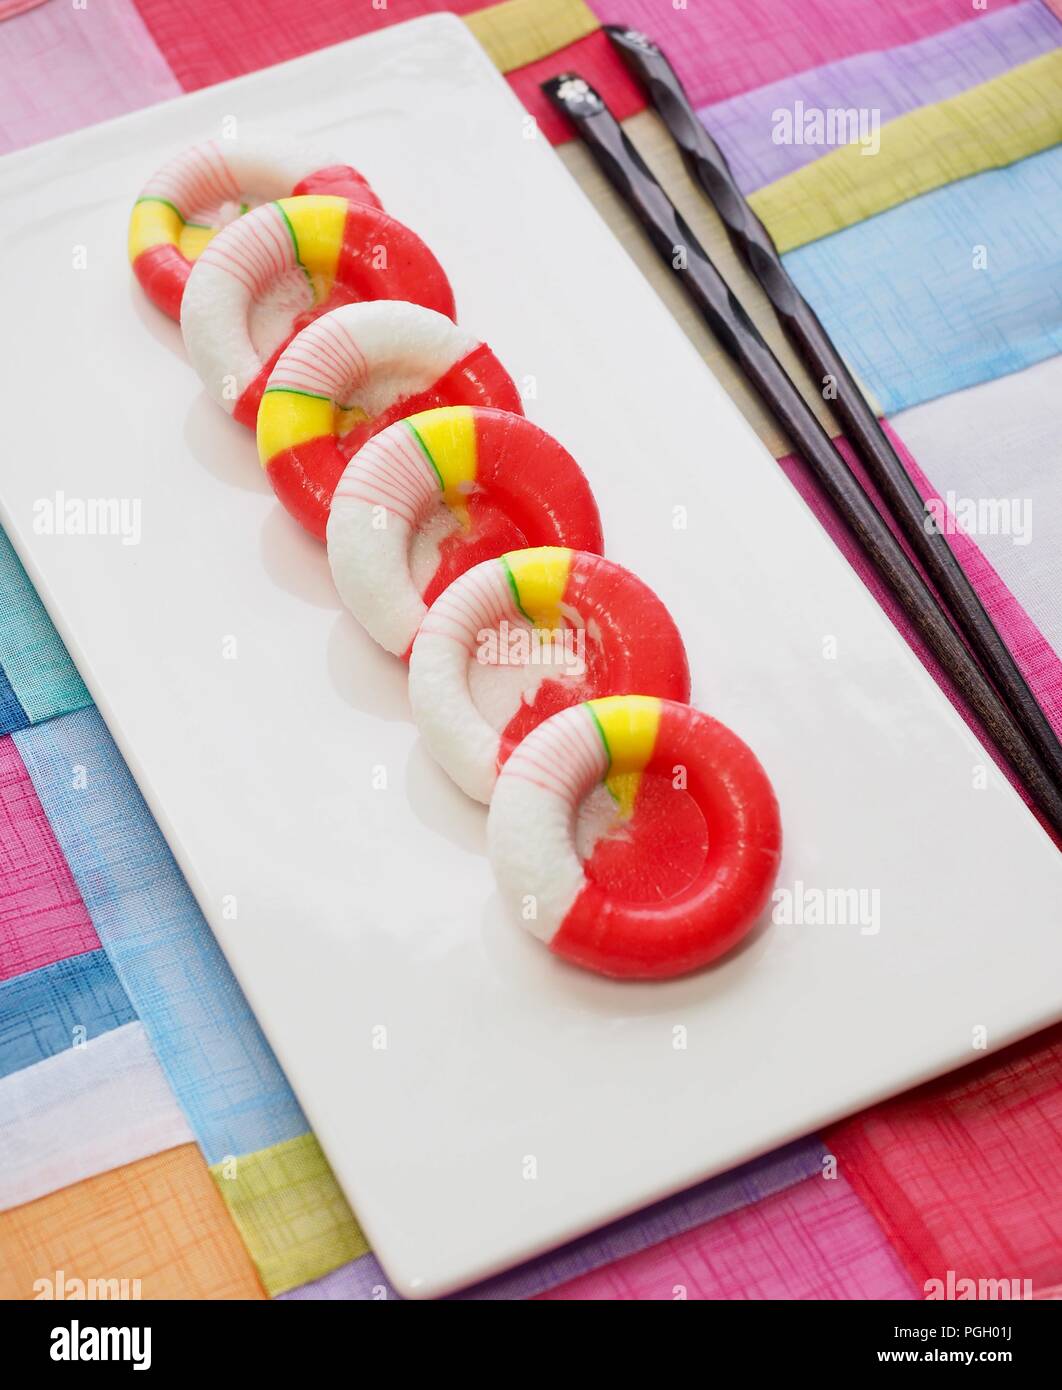 Korean traditional candy Stock Photo